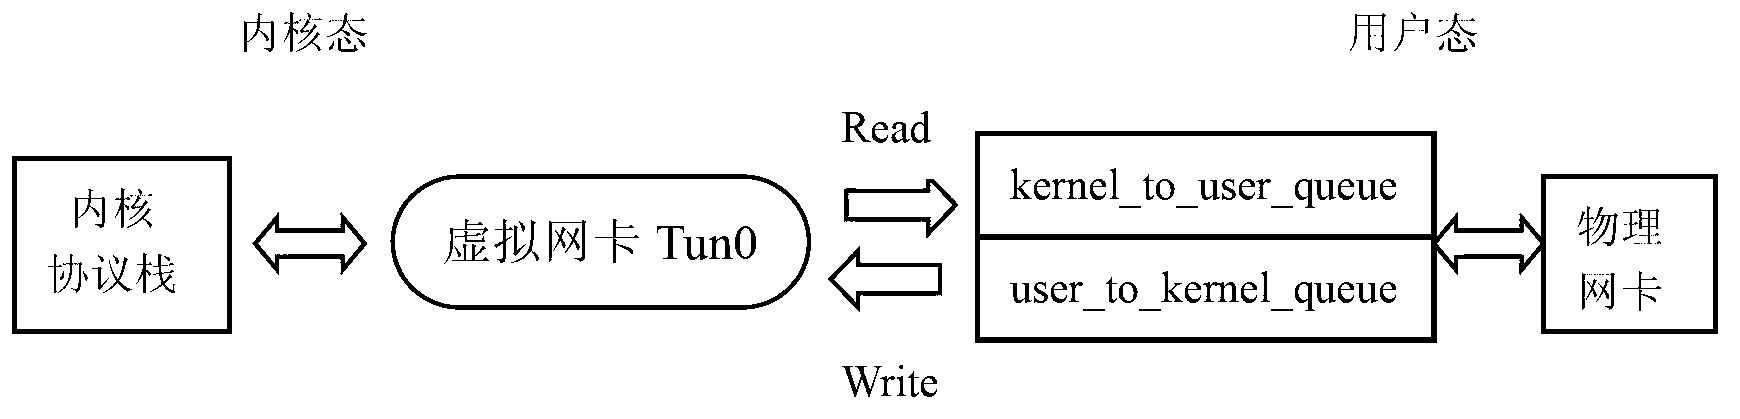 Data message processing method from user mode to kernel mode